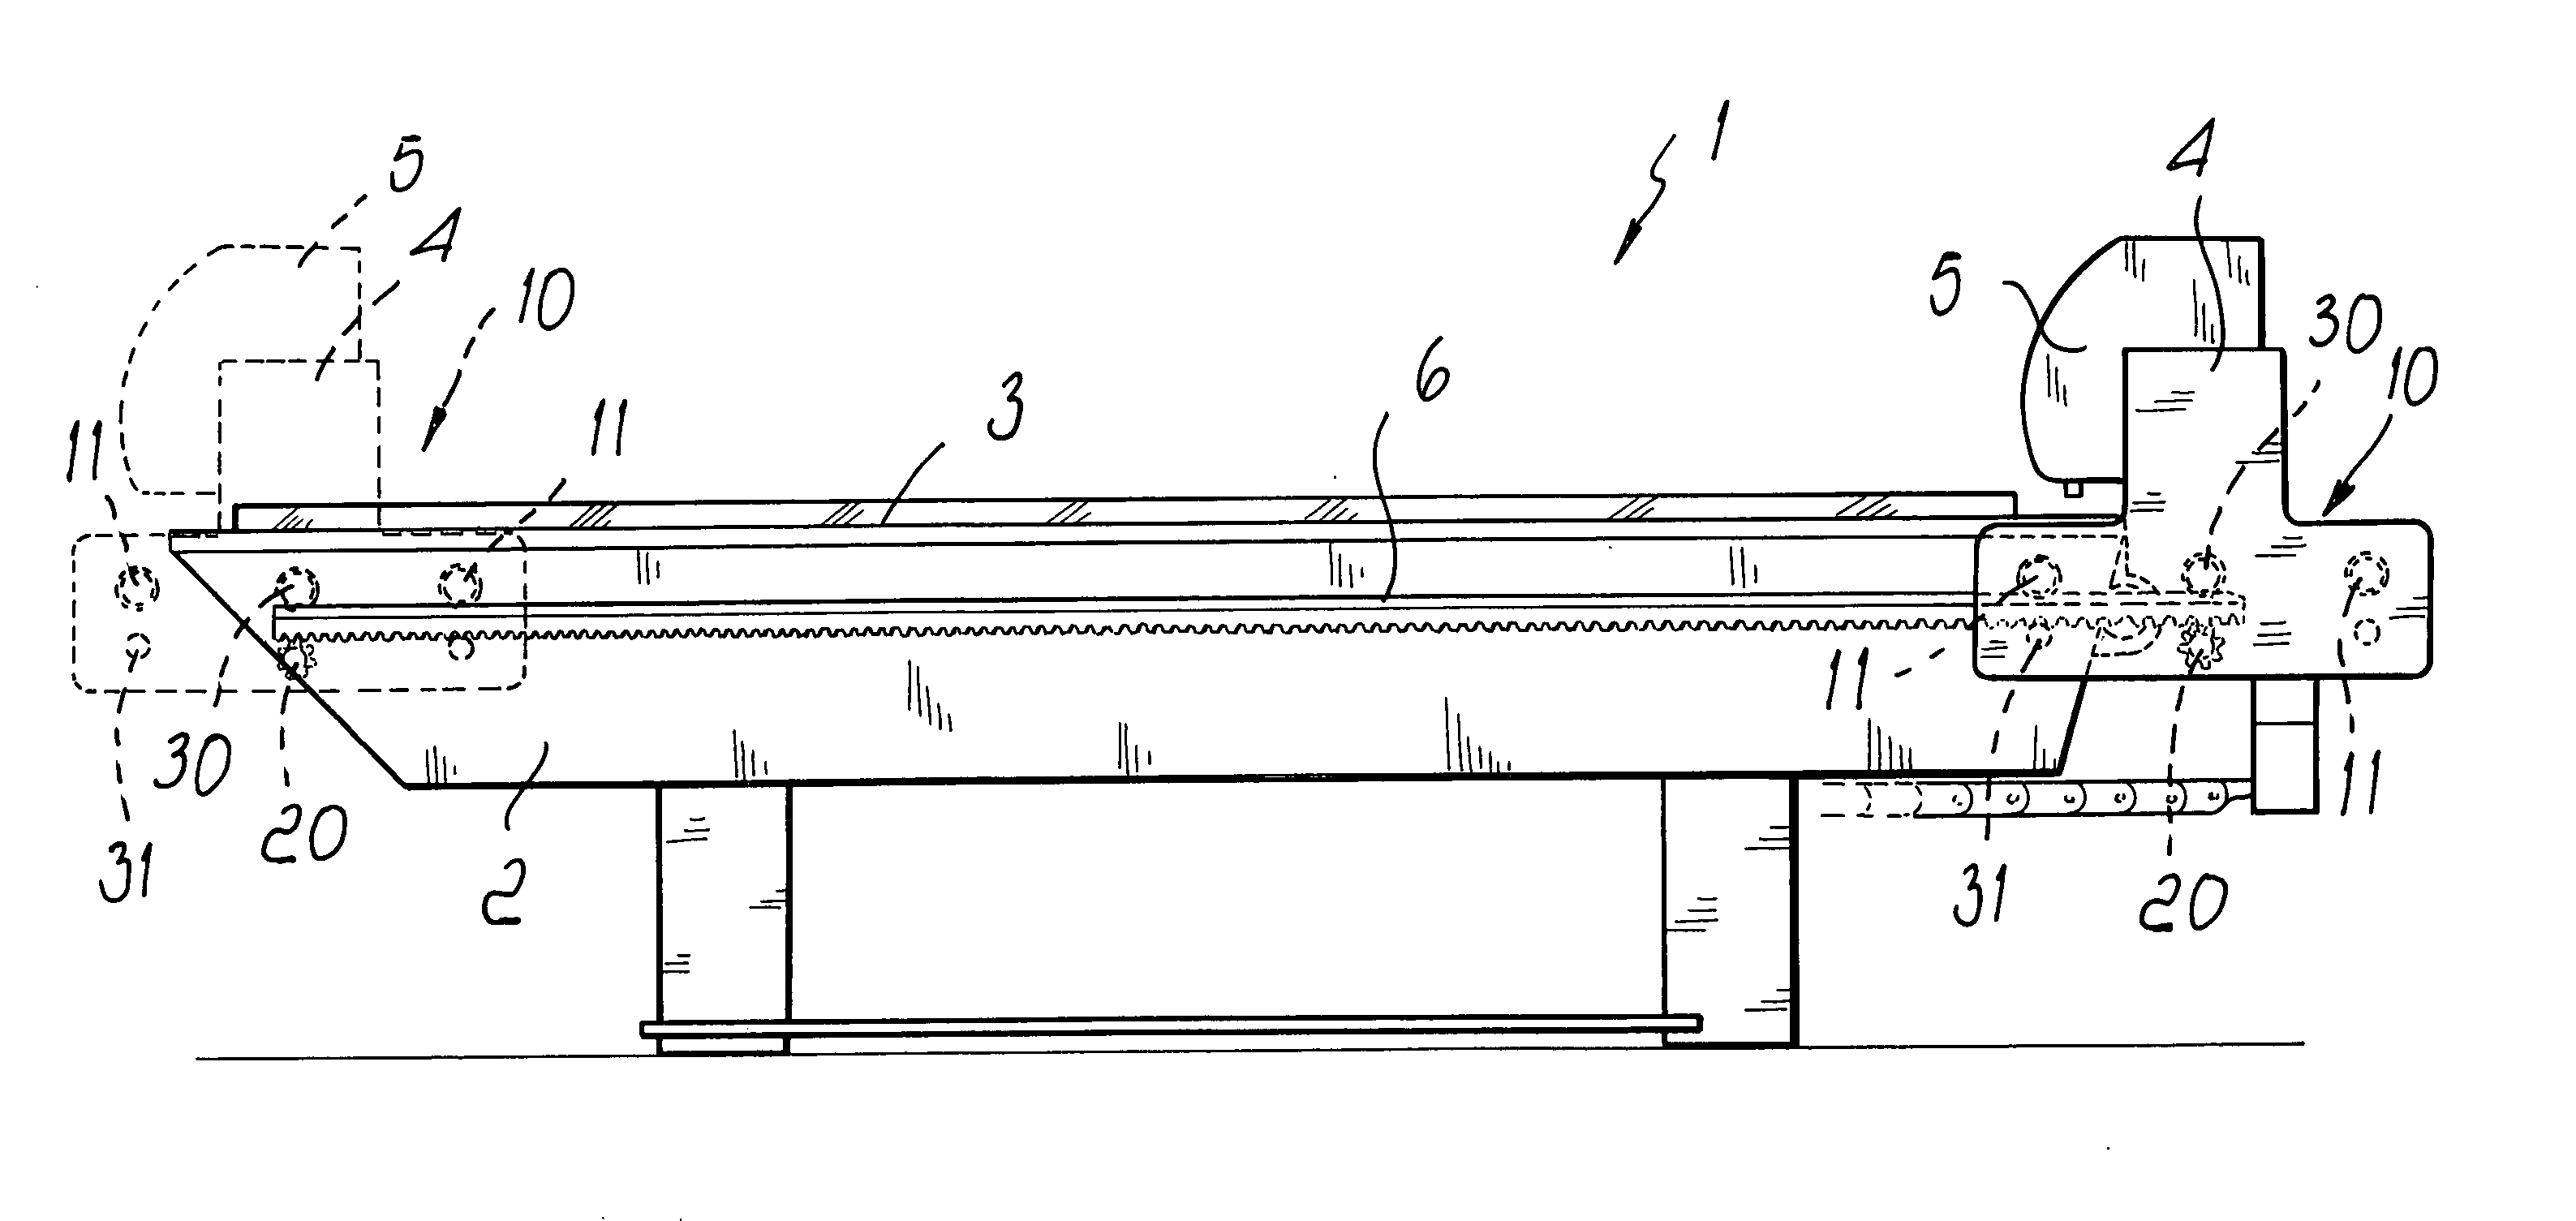 Glass pane cutting table allowing useful cutting dimensions optimization